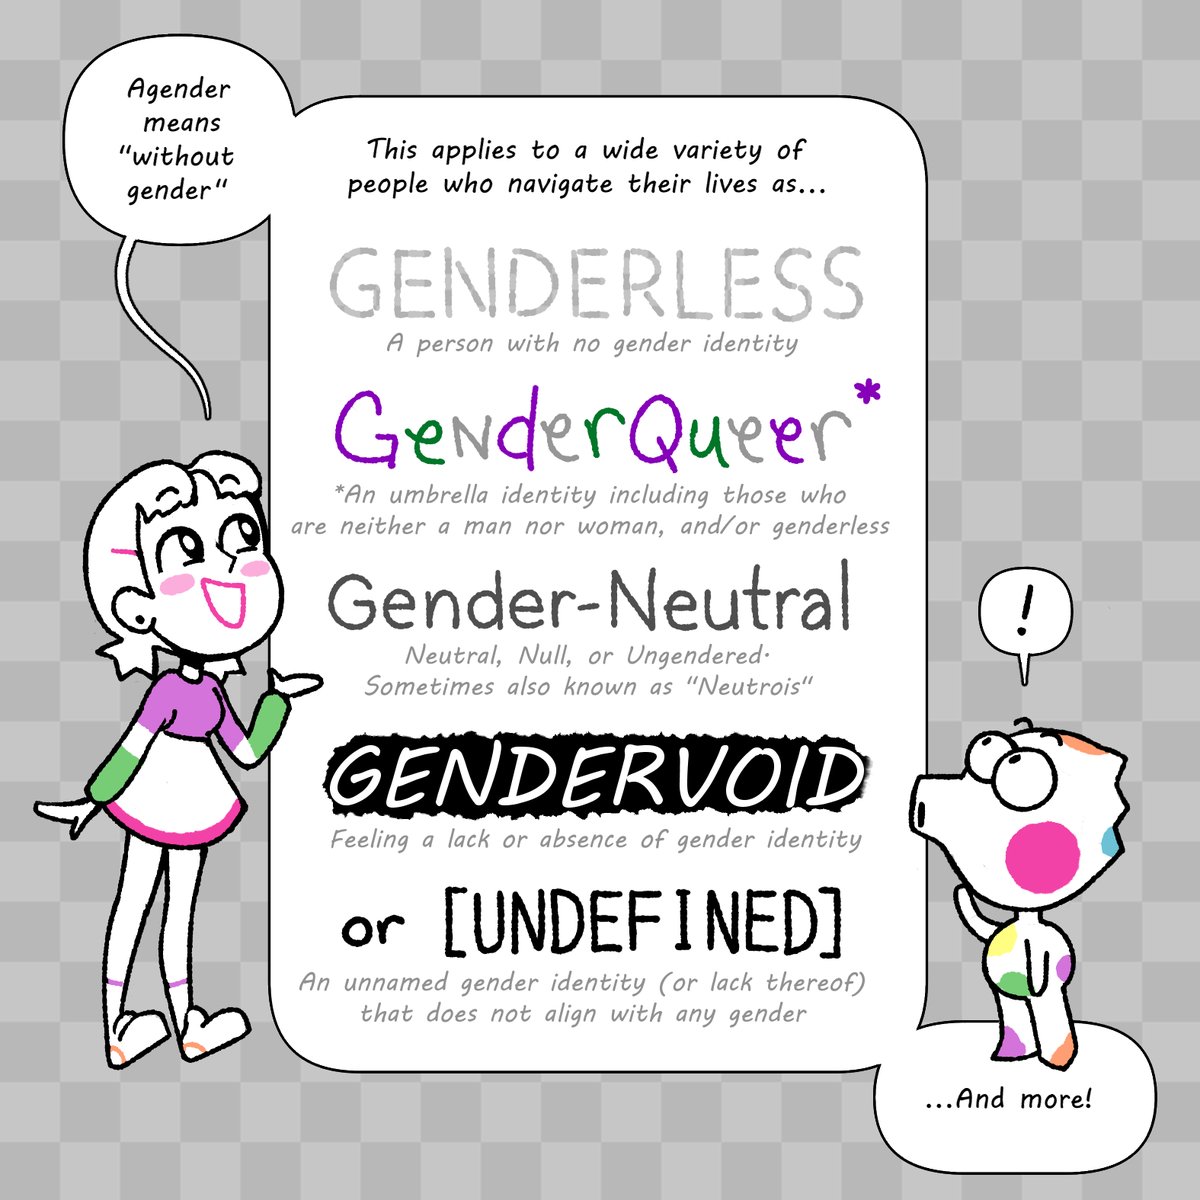 May 19th is Agender Pride Day! I made a little comic to explain what being Agender means to me with some help from a little figment💜

1/2 